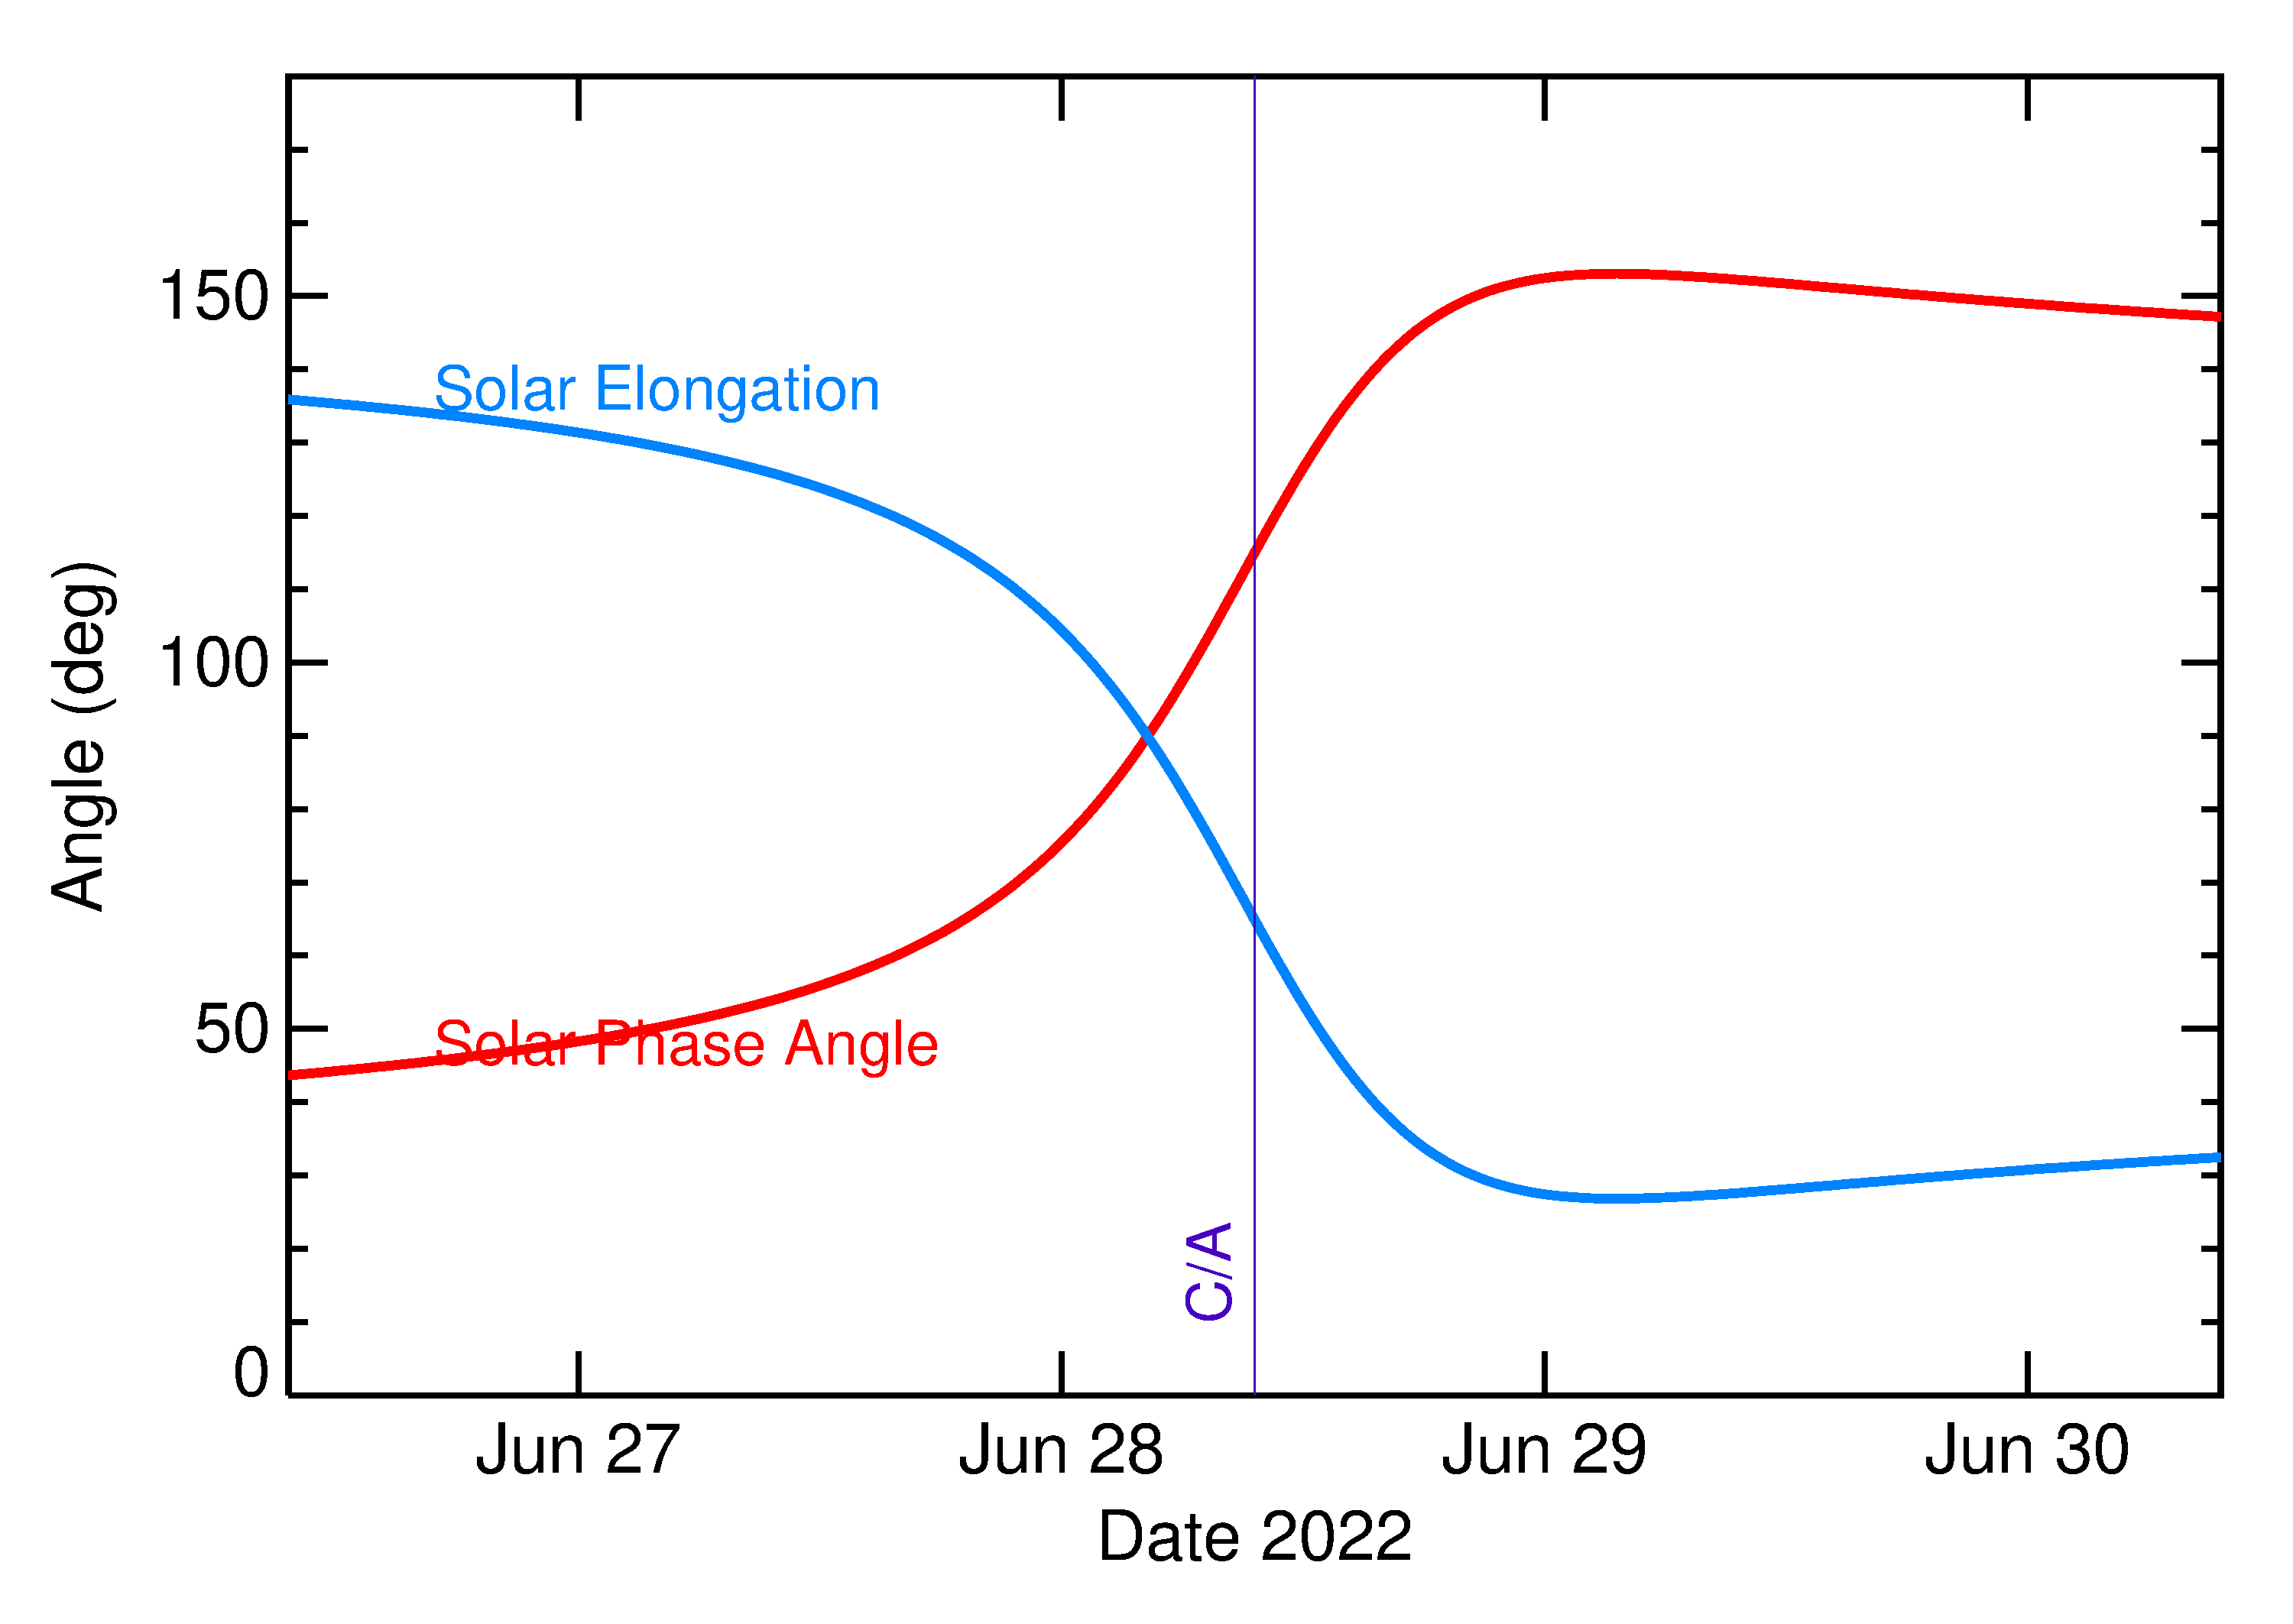 Solar Elongation and Solar Phase Angle of 2022 MN1 in the days around closest approach